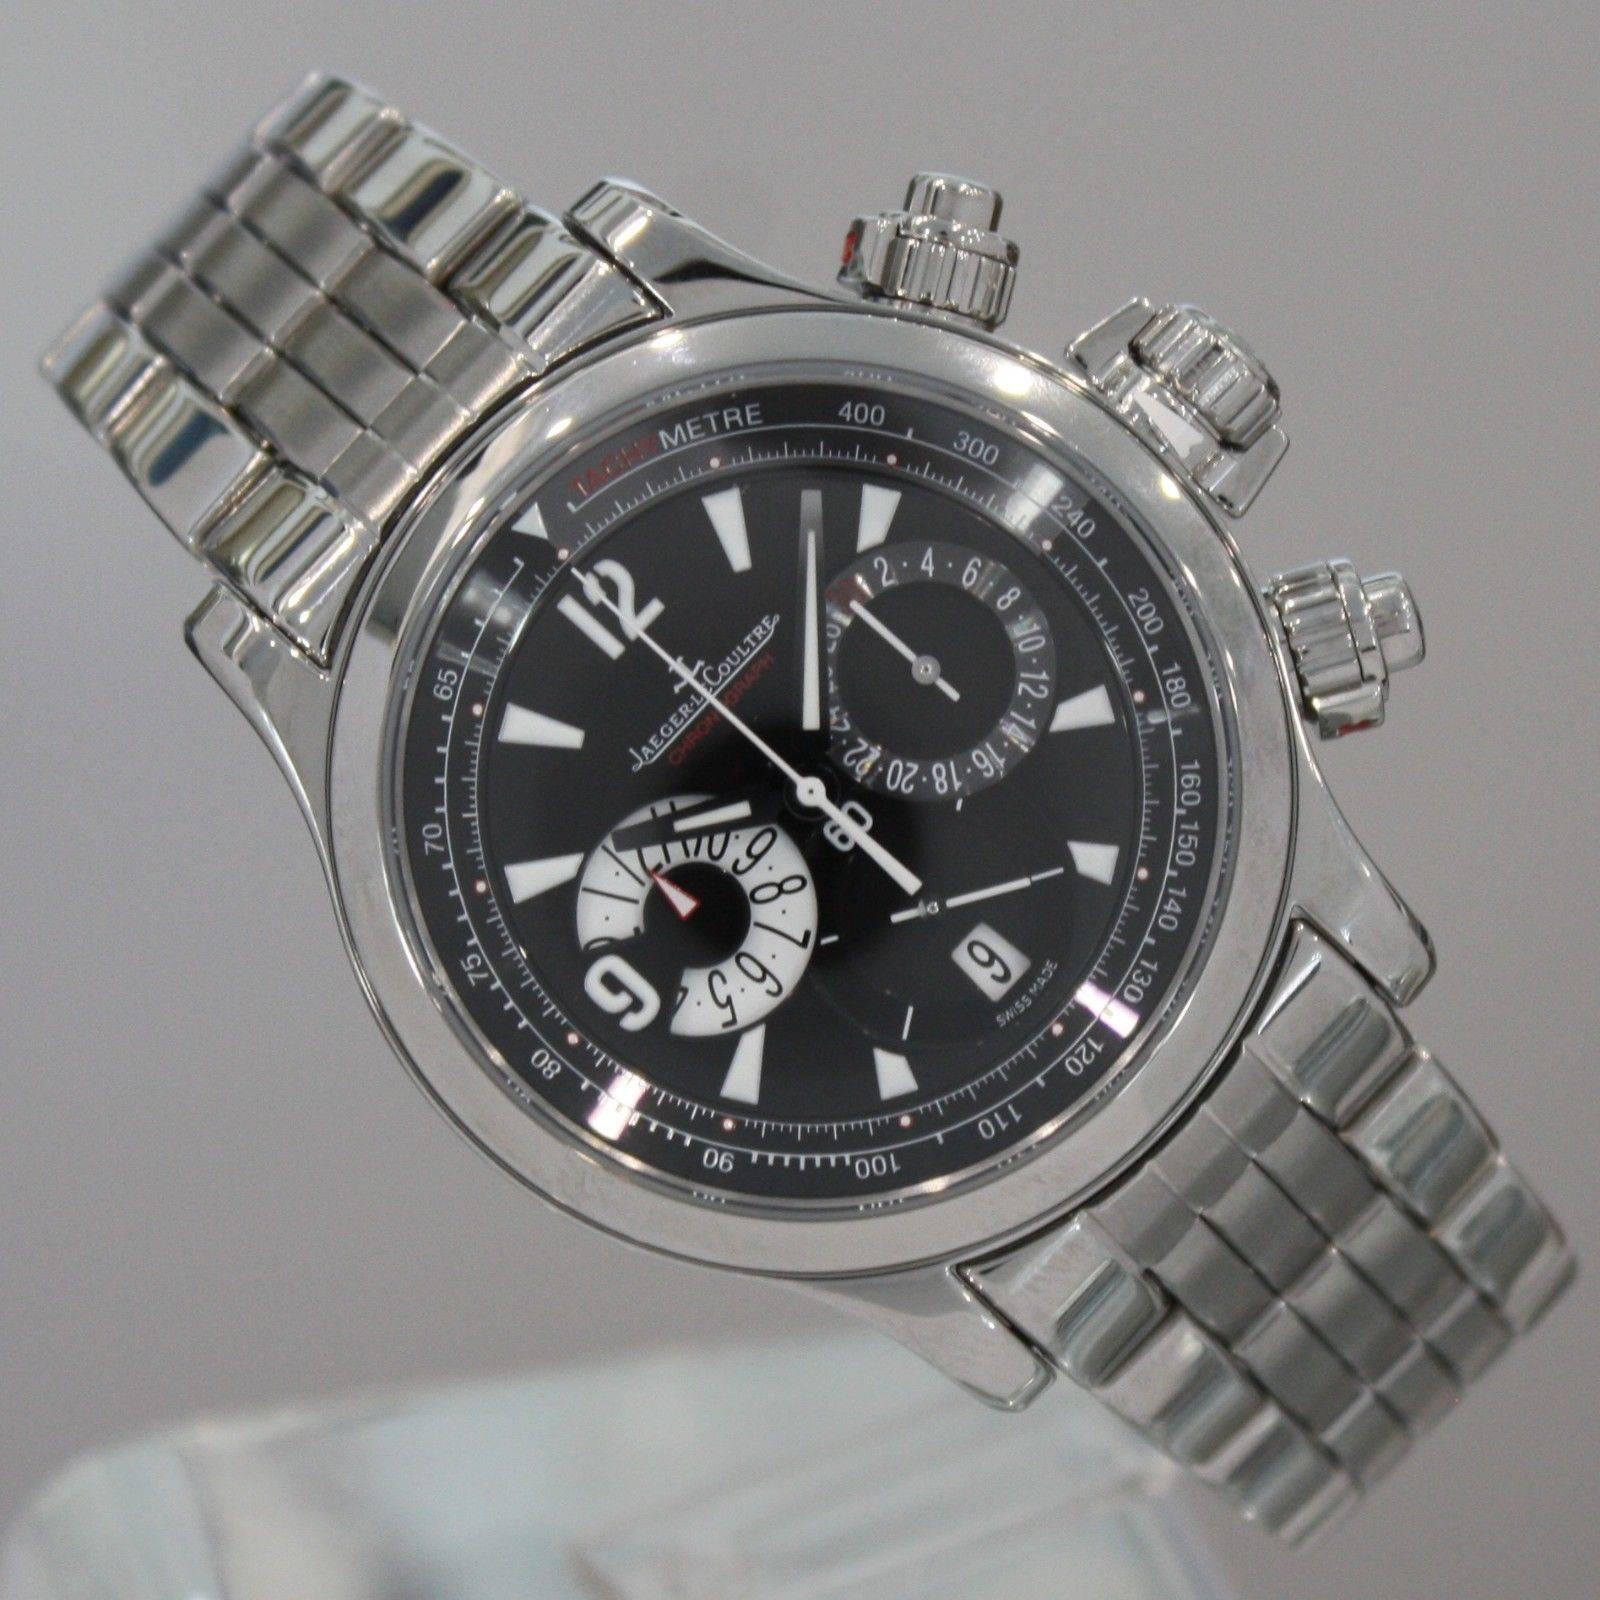 Women's or Men's Jaeger-LeCoultre Stainless Steel Master Compressor Chronograph Wristwatch